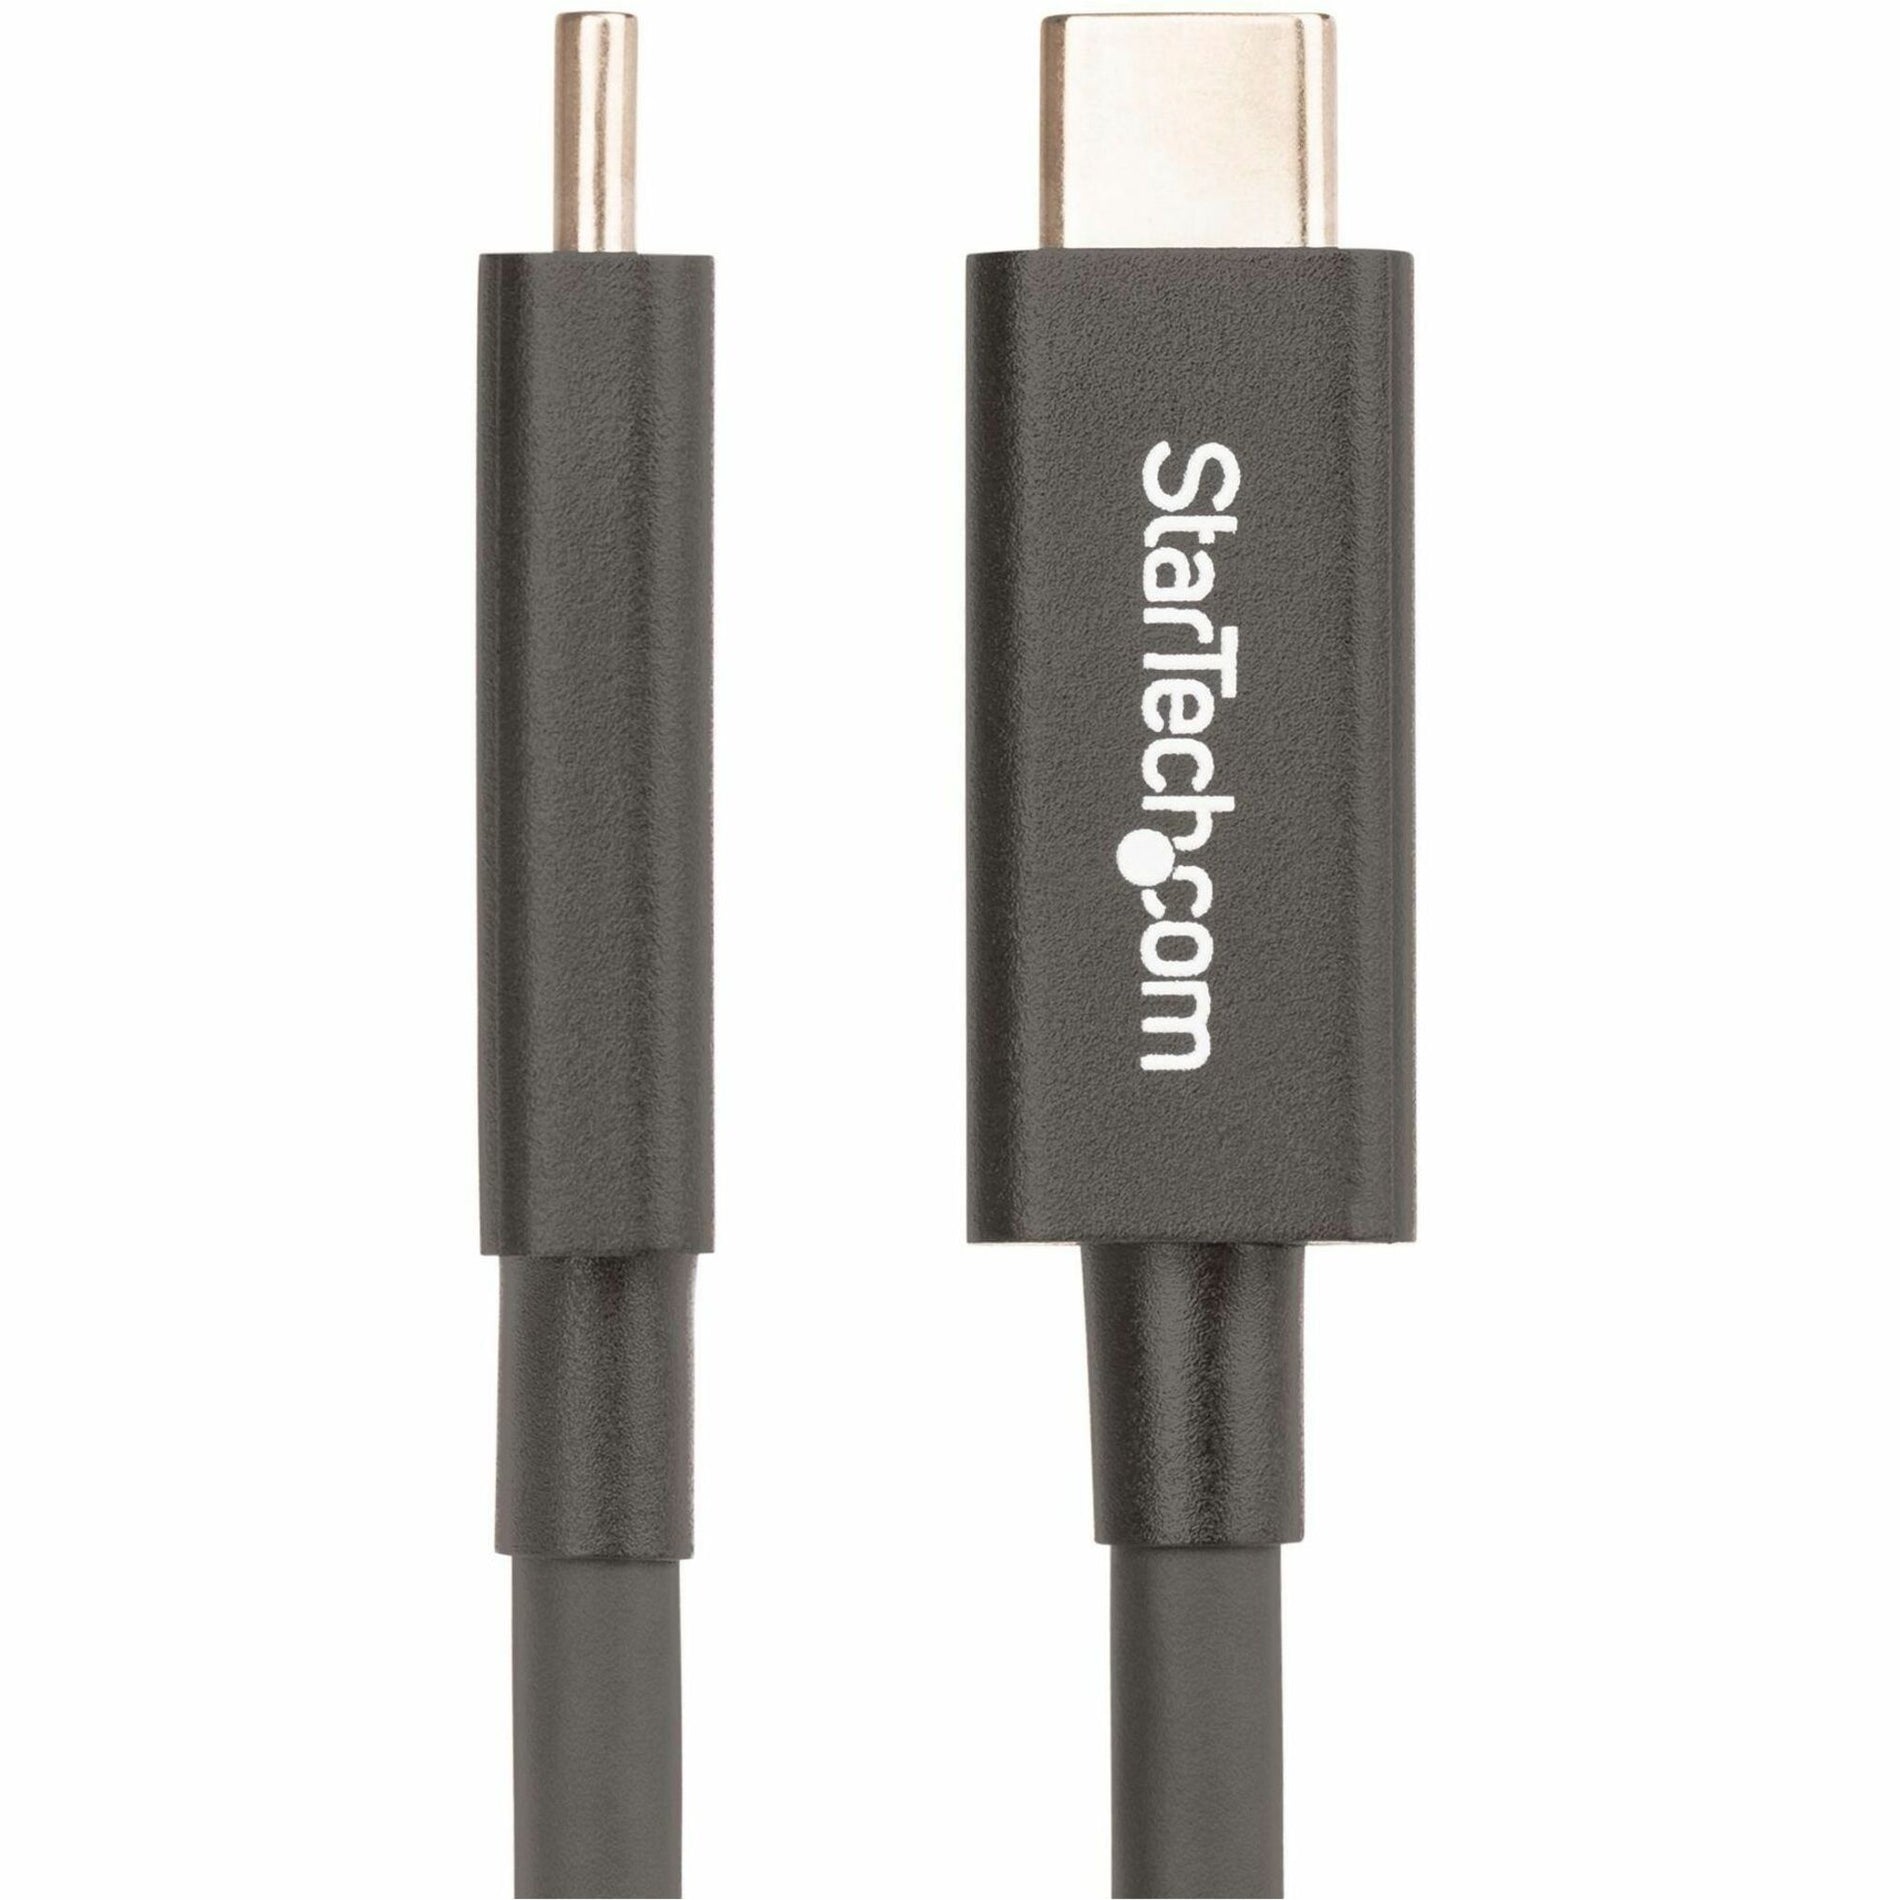 StarTech.com A40G2MB-TB4-CABLE Thunderbolt 4 Data Transfer Cable, 6 ft, 40 Gbit/s, Charging, Active, USB-Power Delivery (USB PD), Display Stream Compression (DSC), EMI Protection, Strain Relief, HDR Support, Power Delivery 3.0